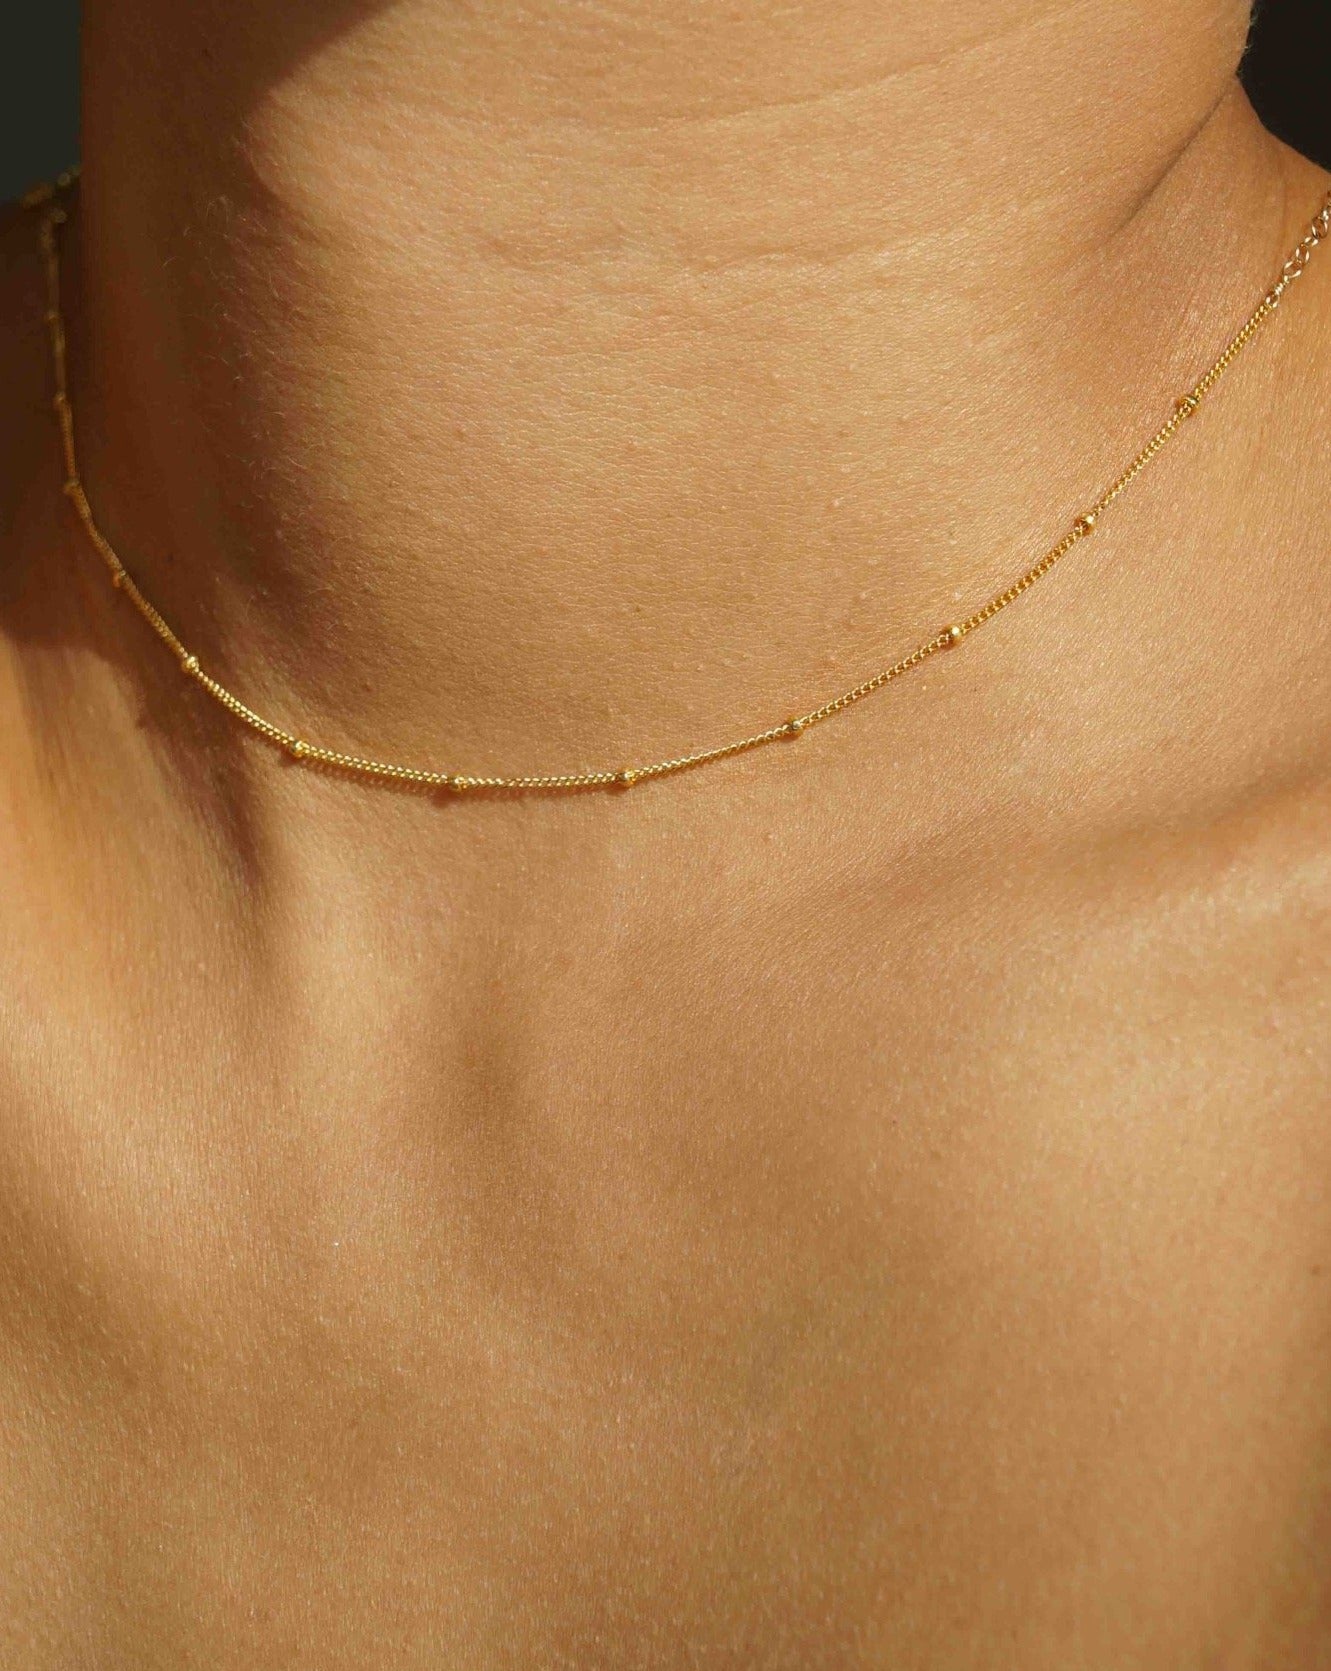 Dots Choker by KOZAKH. A 12 to 14 inch adjustable length necklace in 14K Gold Filled, featuring a 1mm curb chain with balls design.